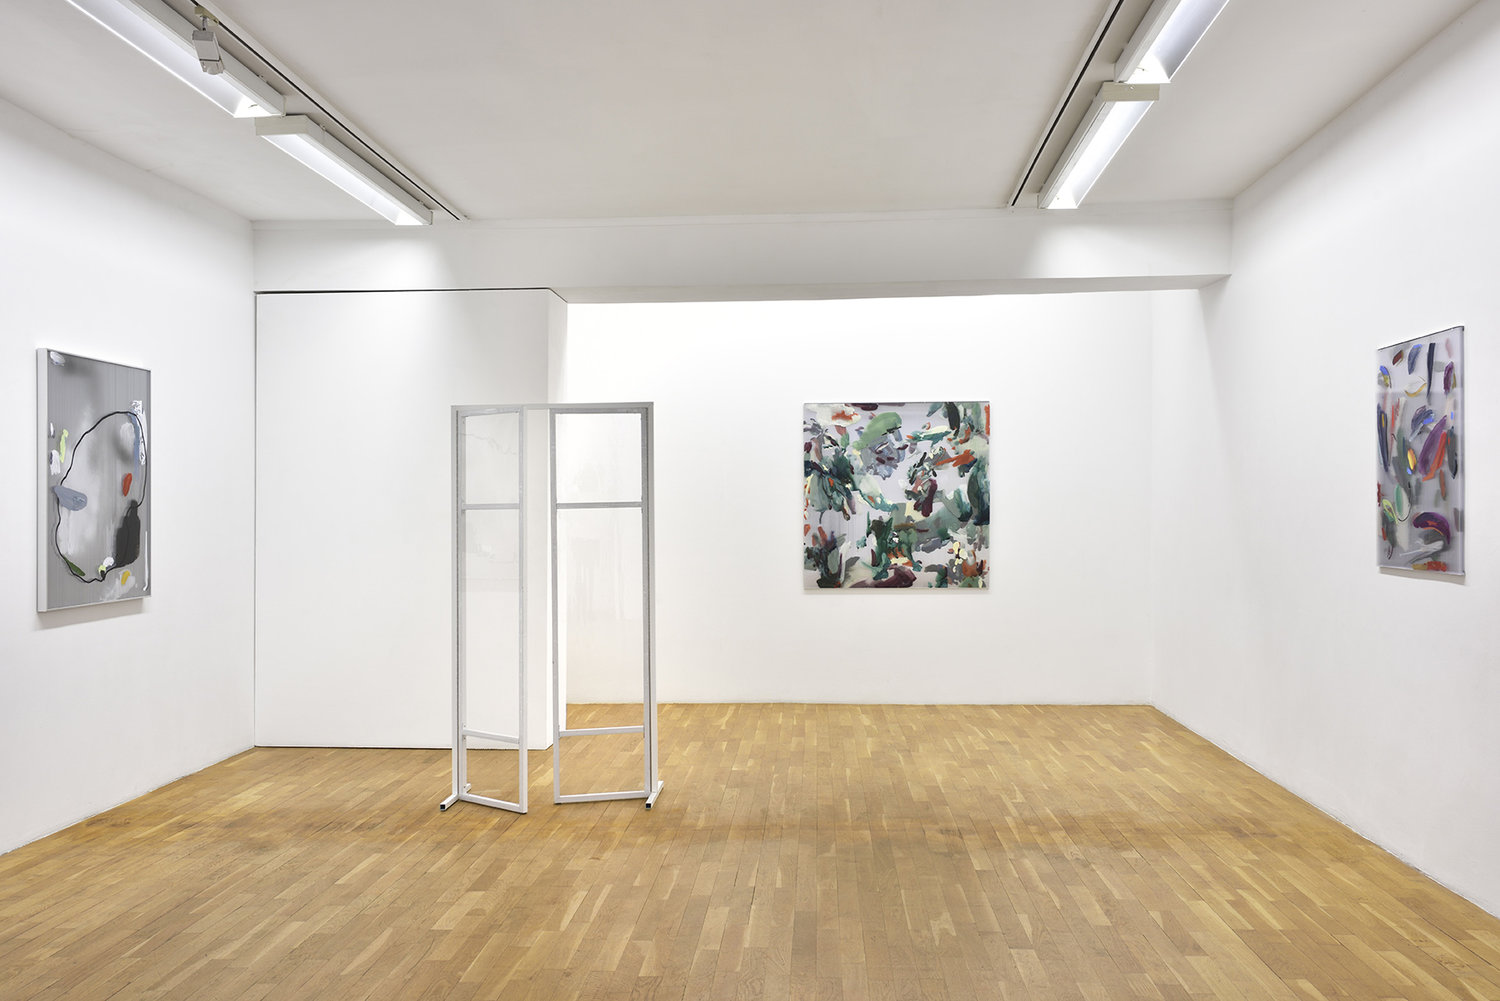 GALERIE ISABELLE GOUNOD, 2019